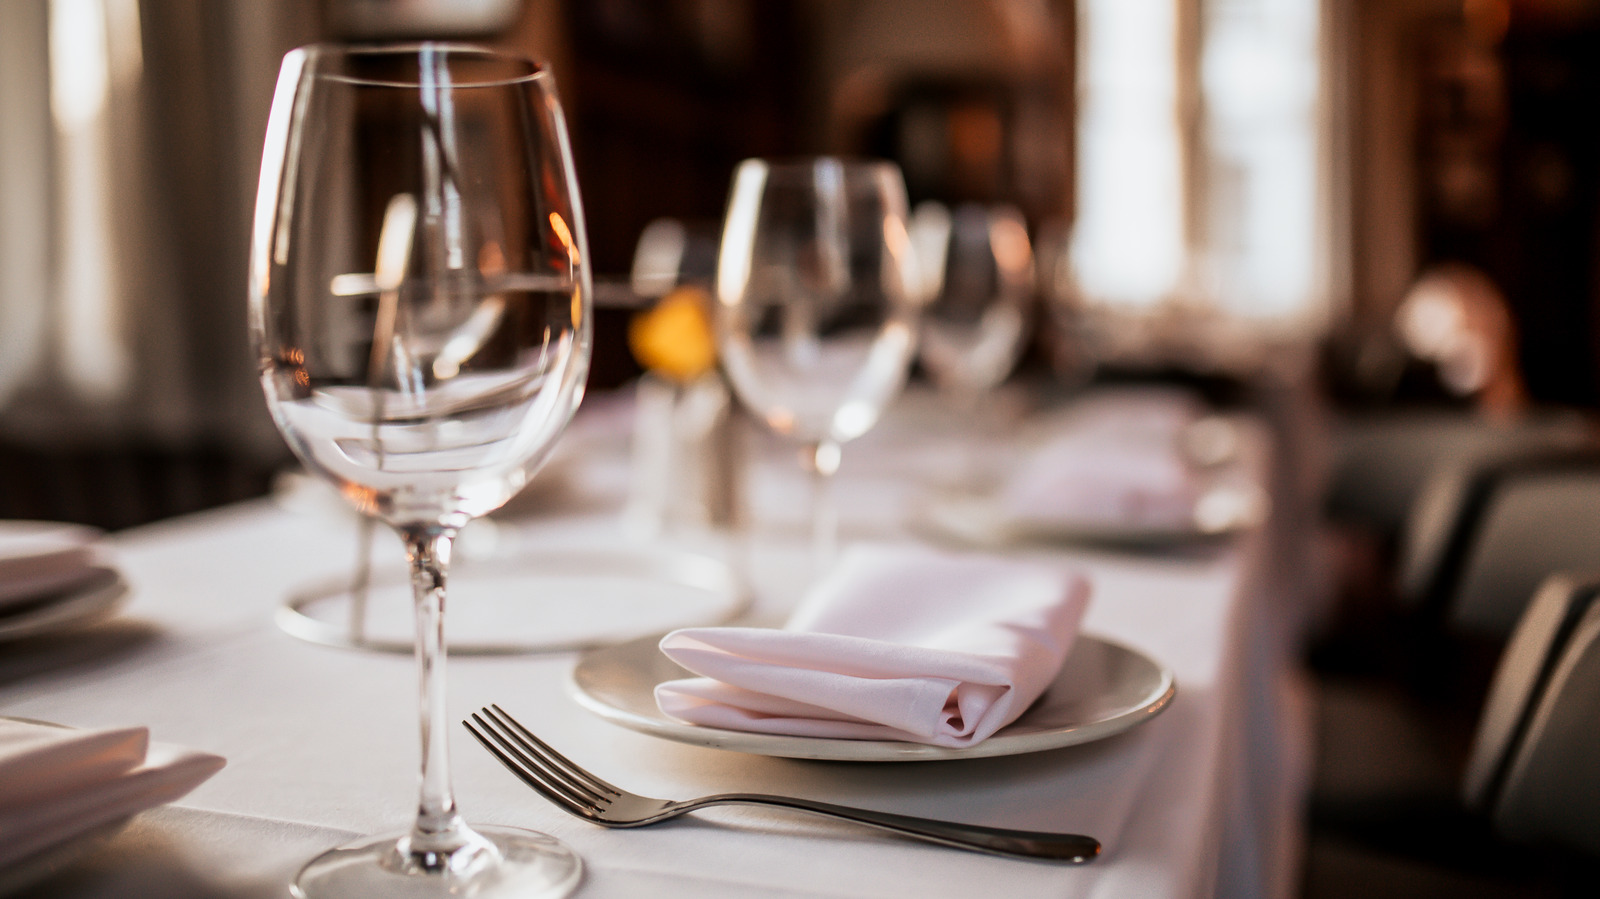 Table Etiquette: Where To Put A Napkin – On The Table Or Chair Seat?